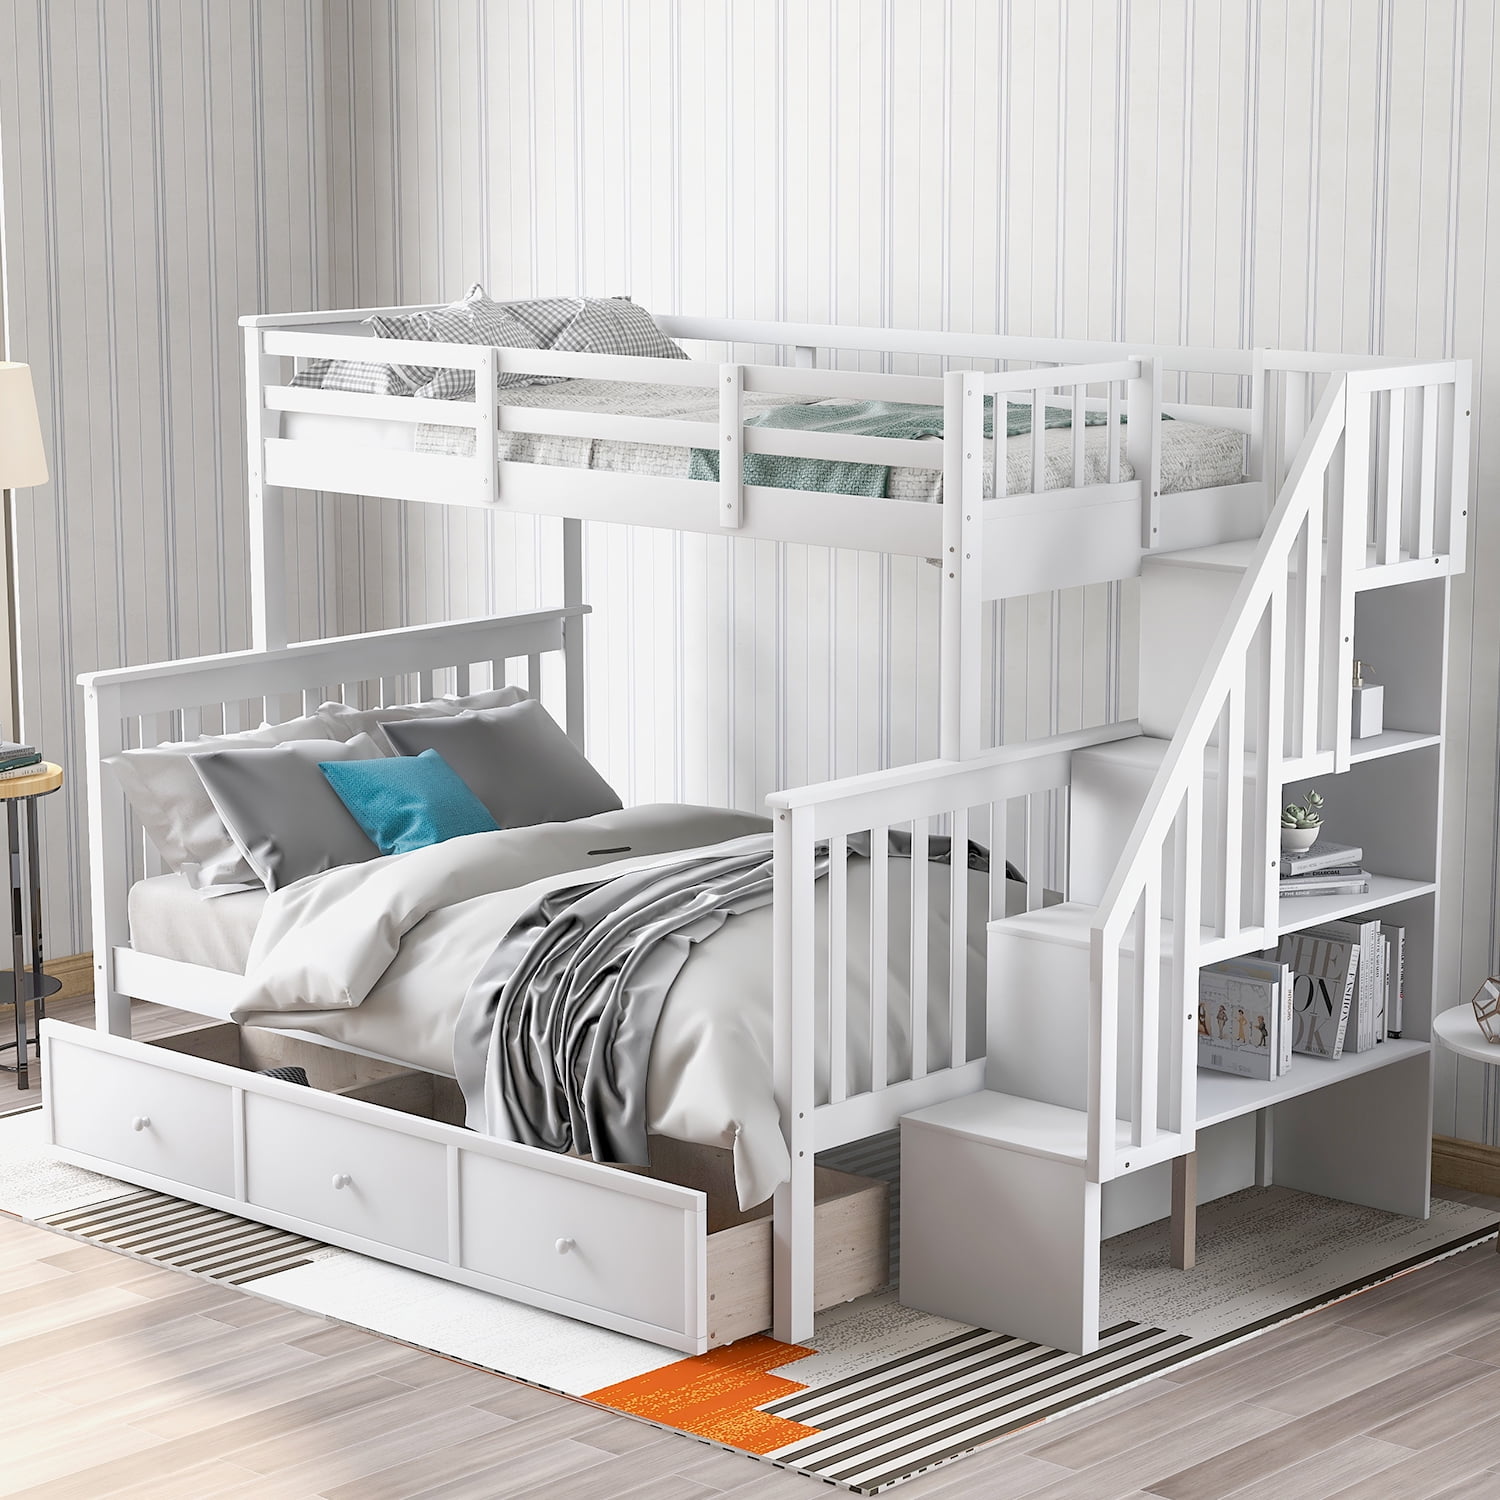 Bunk Bed Guard Rail, Modernluxe Twin Over Full Wood Bunk Bed With Trundle And Storage Stairs